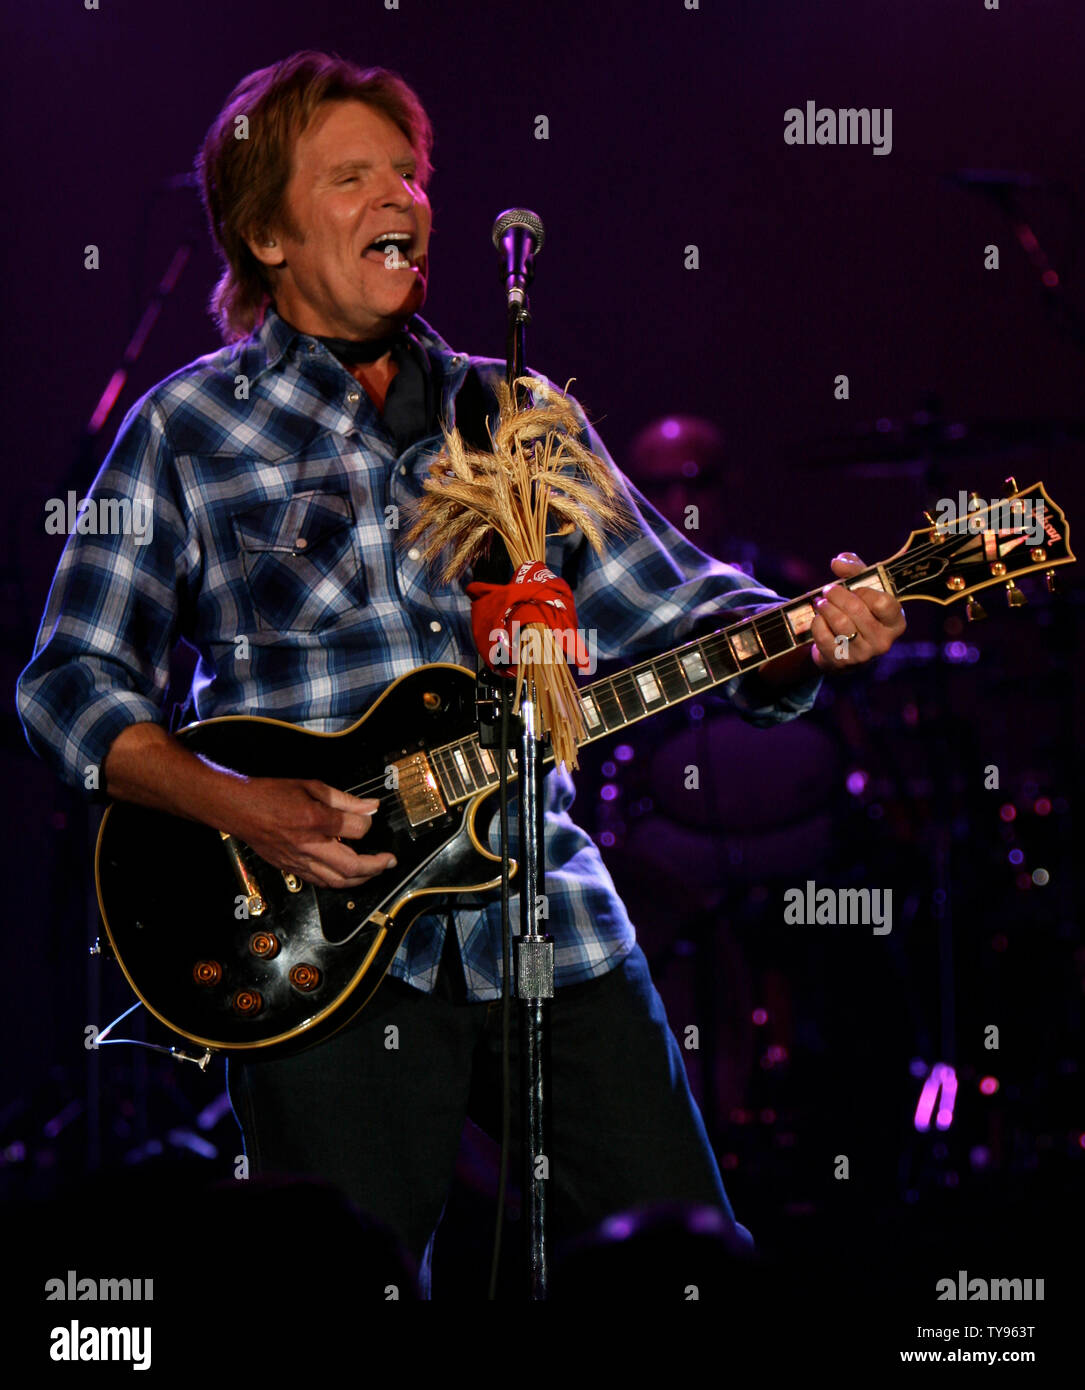 John Fogerty performs in concert at The Joint in the Hard Rock Casino in Las Vegas on November 25, 2007. The 63 year old former lead singer of Creedence Clearwater  Revival is touring in support of his new CD 'Revival' and next performs in Minneapolis on November 27th. (UPI Photo/Daniel Gluskoter). Stock Photo